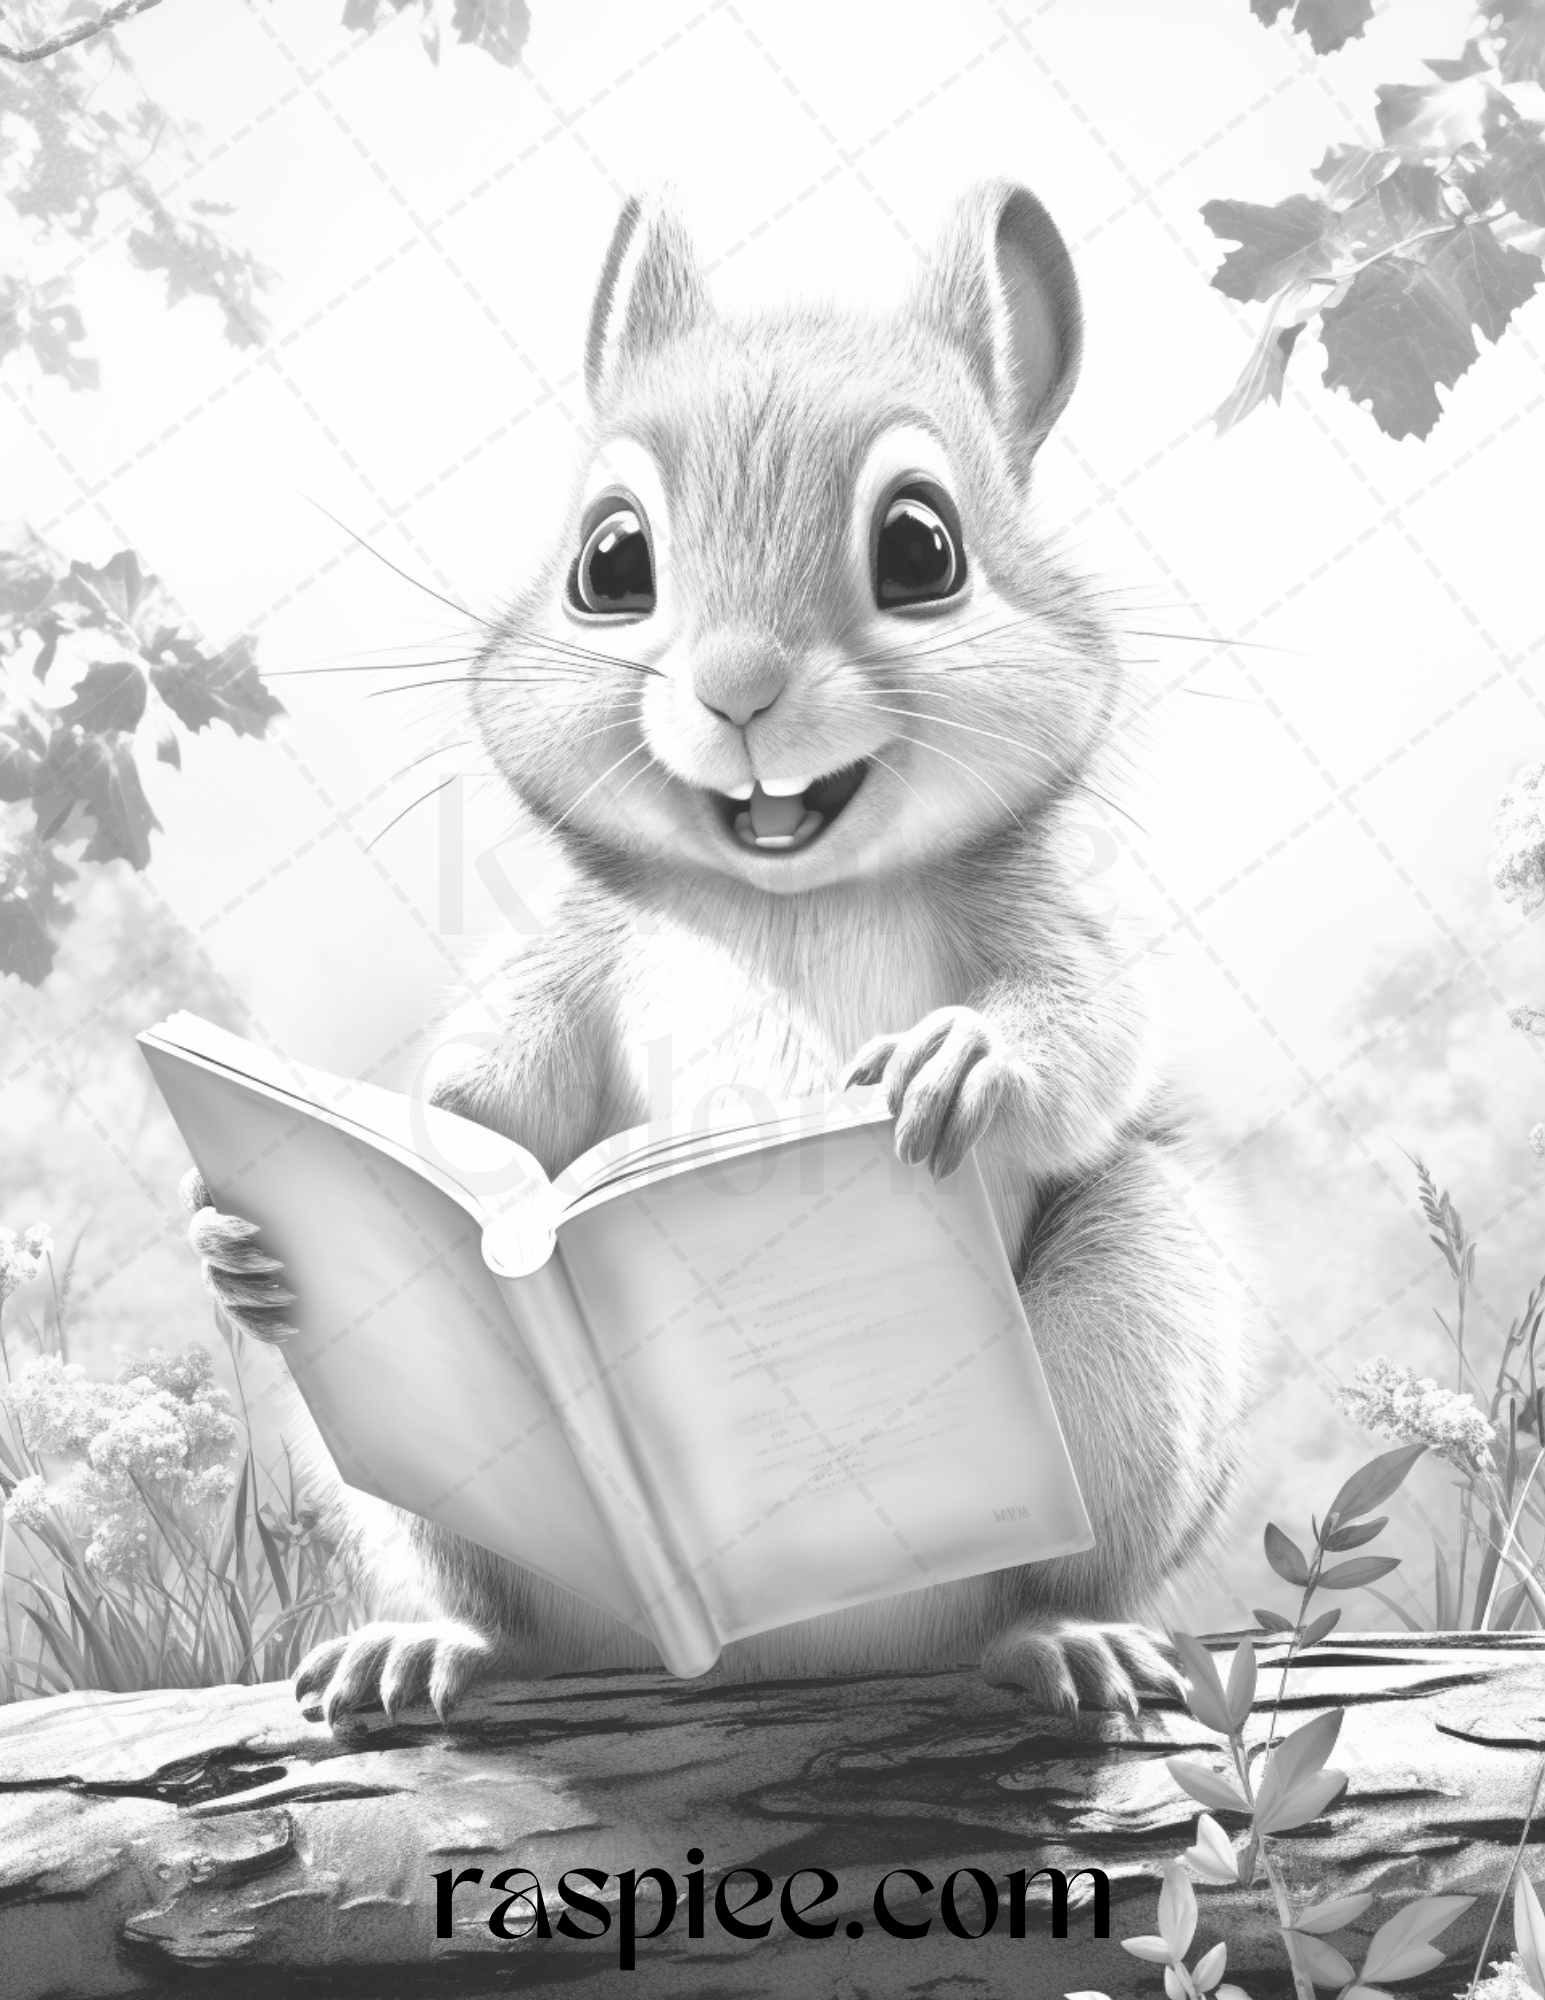 52 Adorable Squirrels Grayscale Coloring Pages Printable for Adults Kids, PDF File Instant Download - Raspiee Coloring